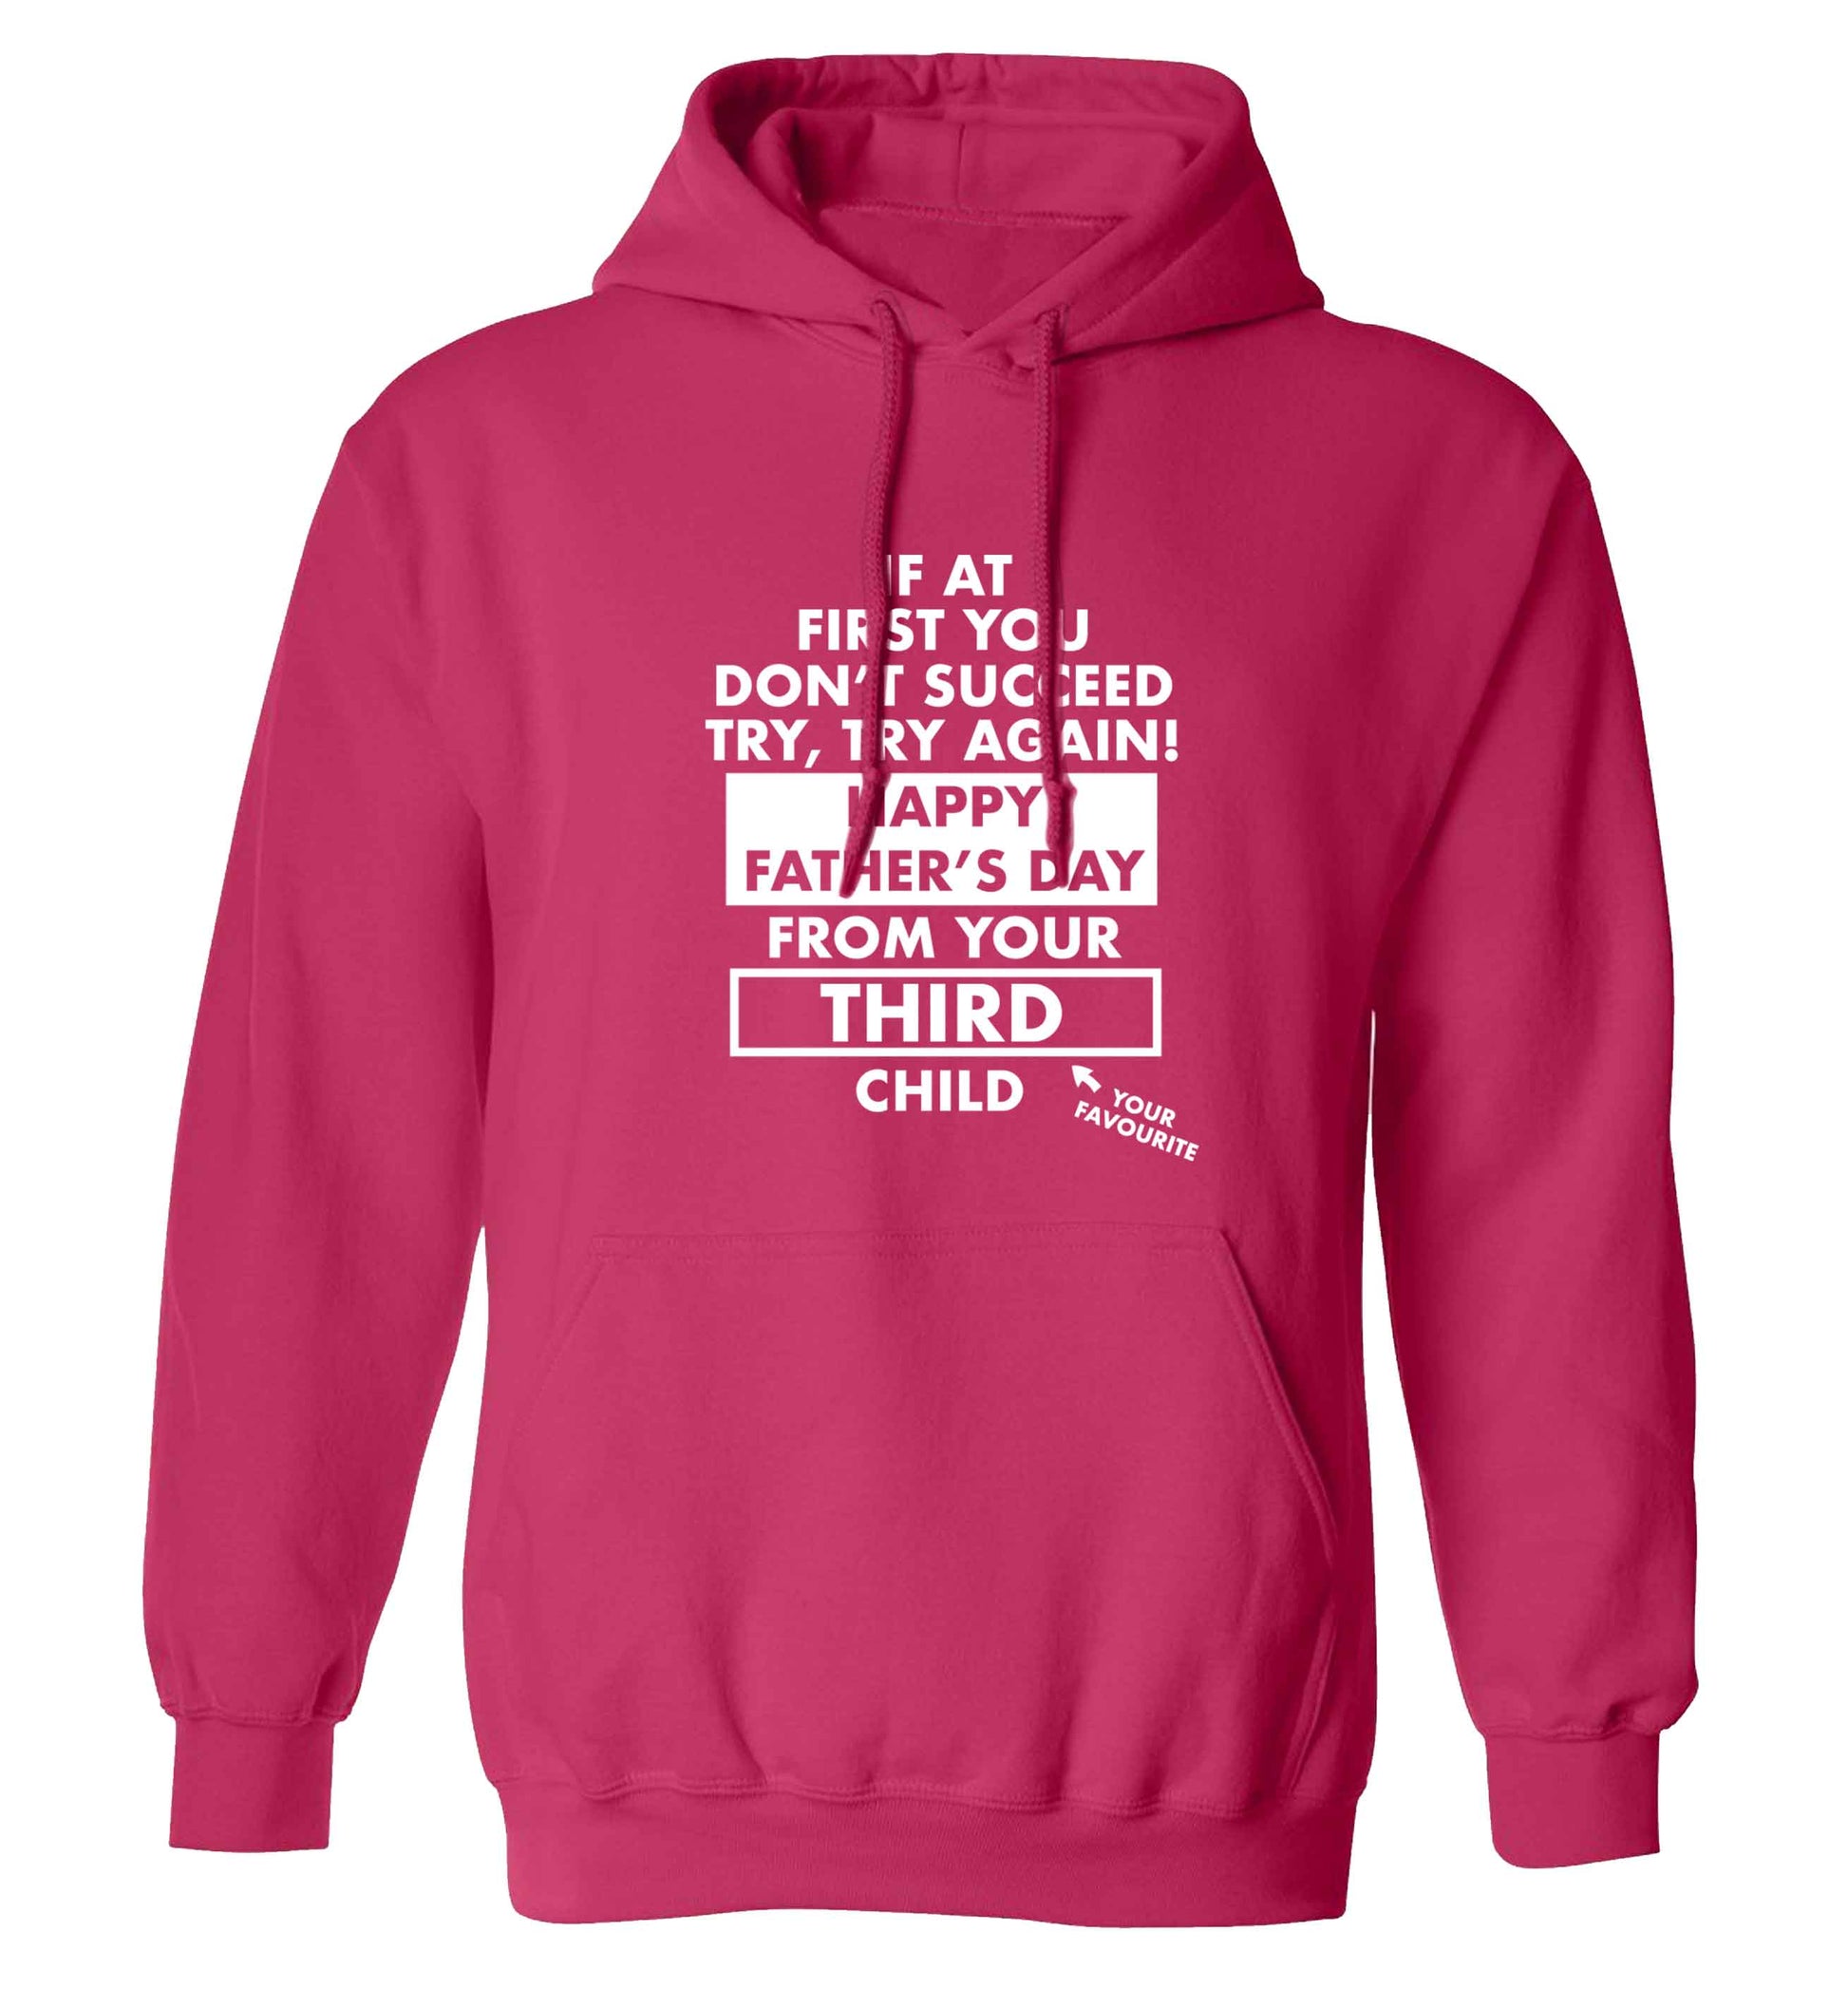 If at first you don't succeed try, try again Happy Father's day from your third child! adults unisex pink hoodie 2XL